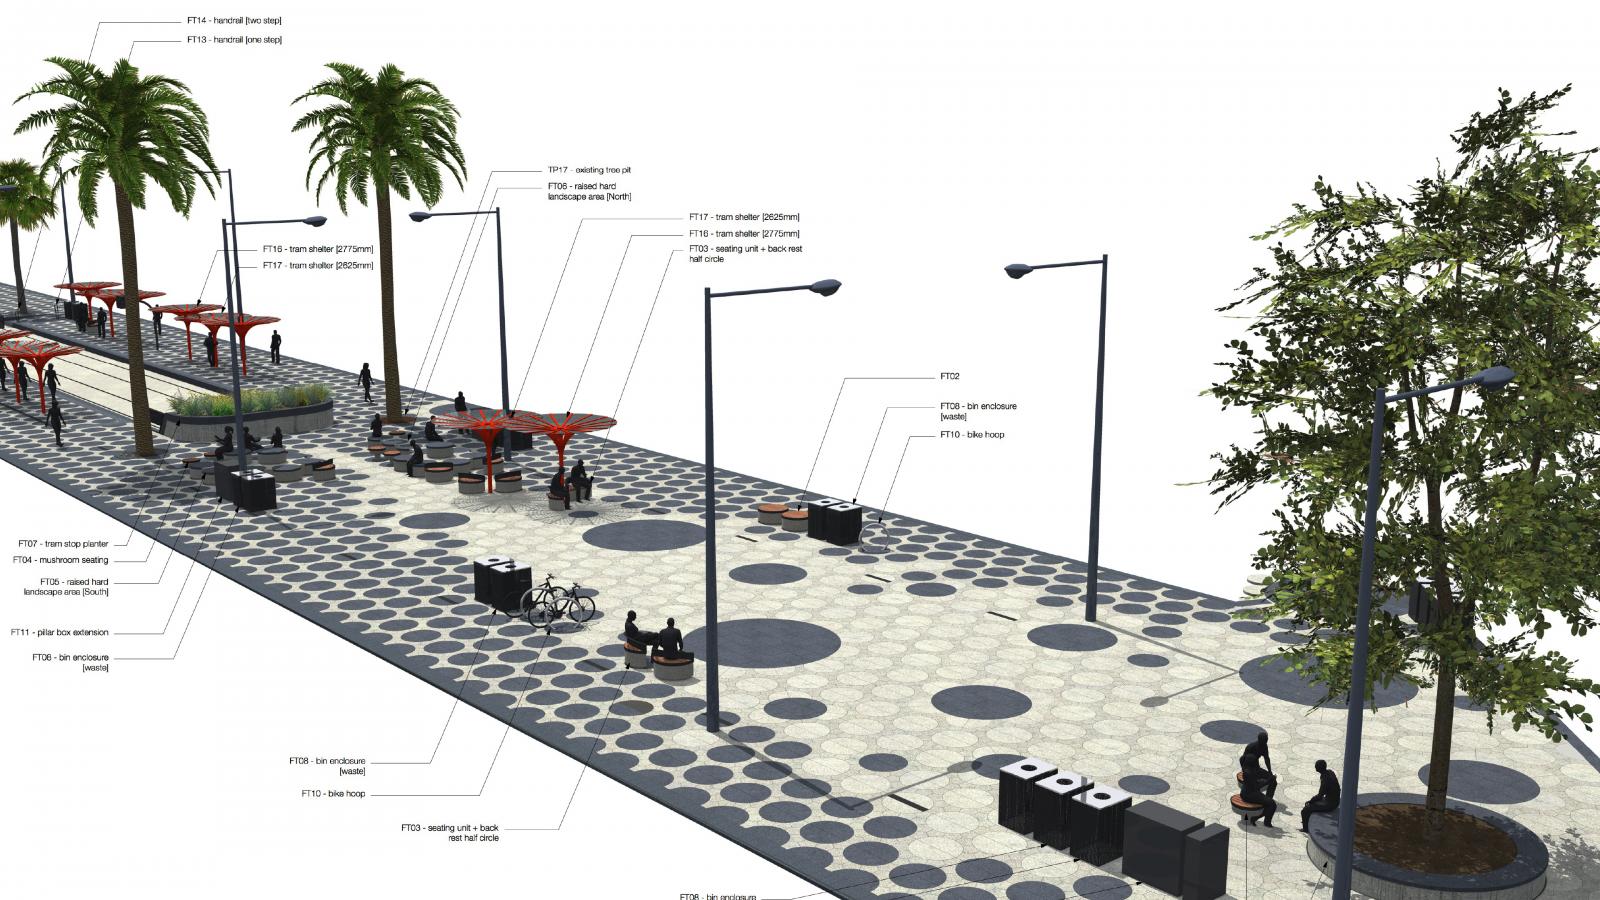 A rendered image depicts a modern urban street design with key features labeled. It includes palm trees, patterned sidewalks, seating areas, bicycle racks, streetlights, and waste bins. The layout shows various functional and aesthetic elements for pedestrians on Acland Street in St Kilda.